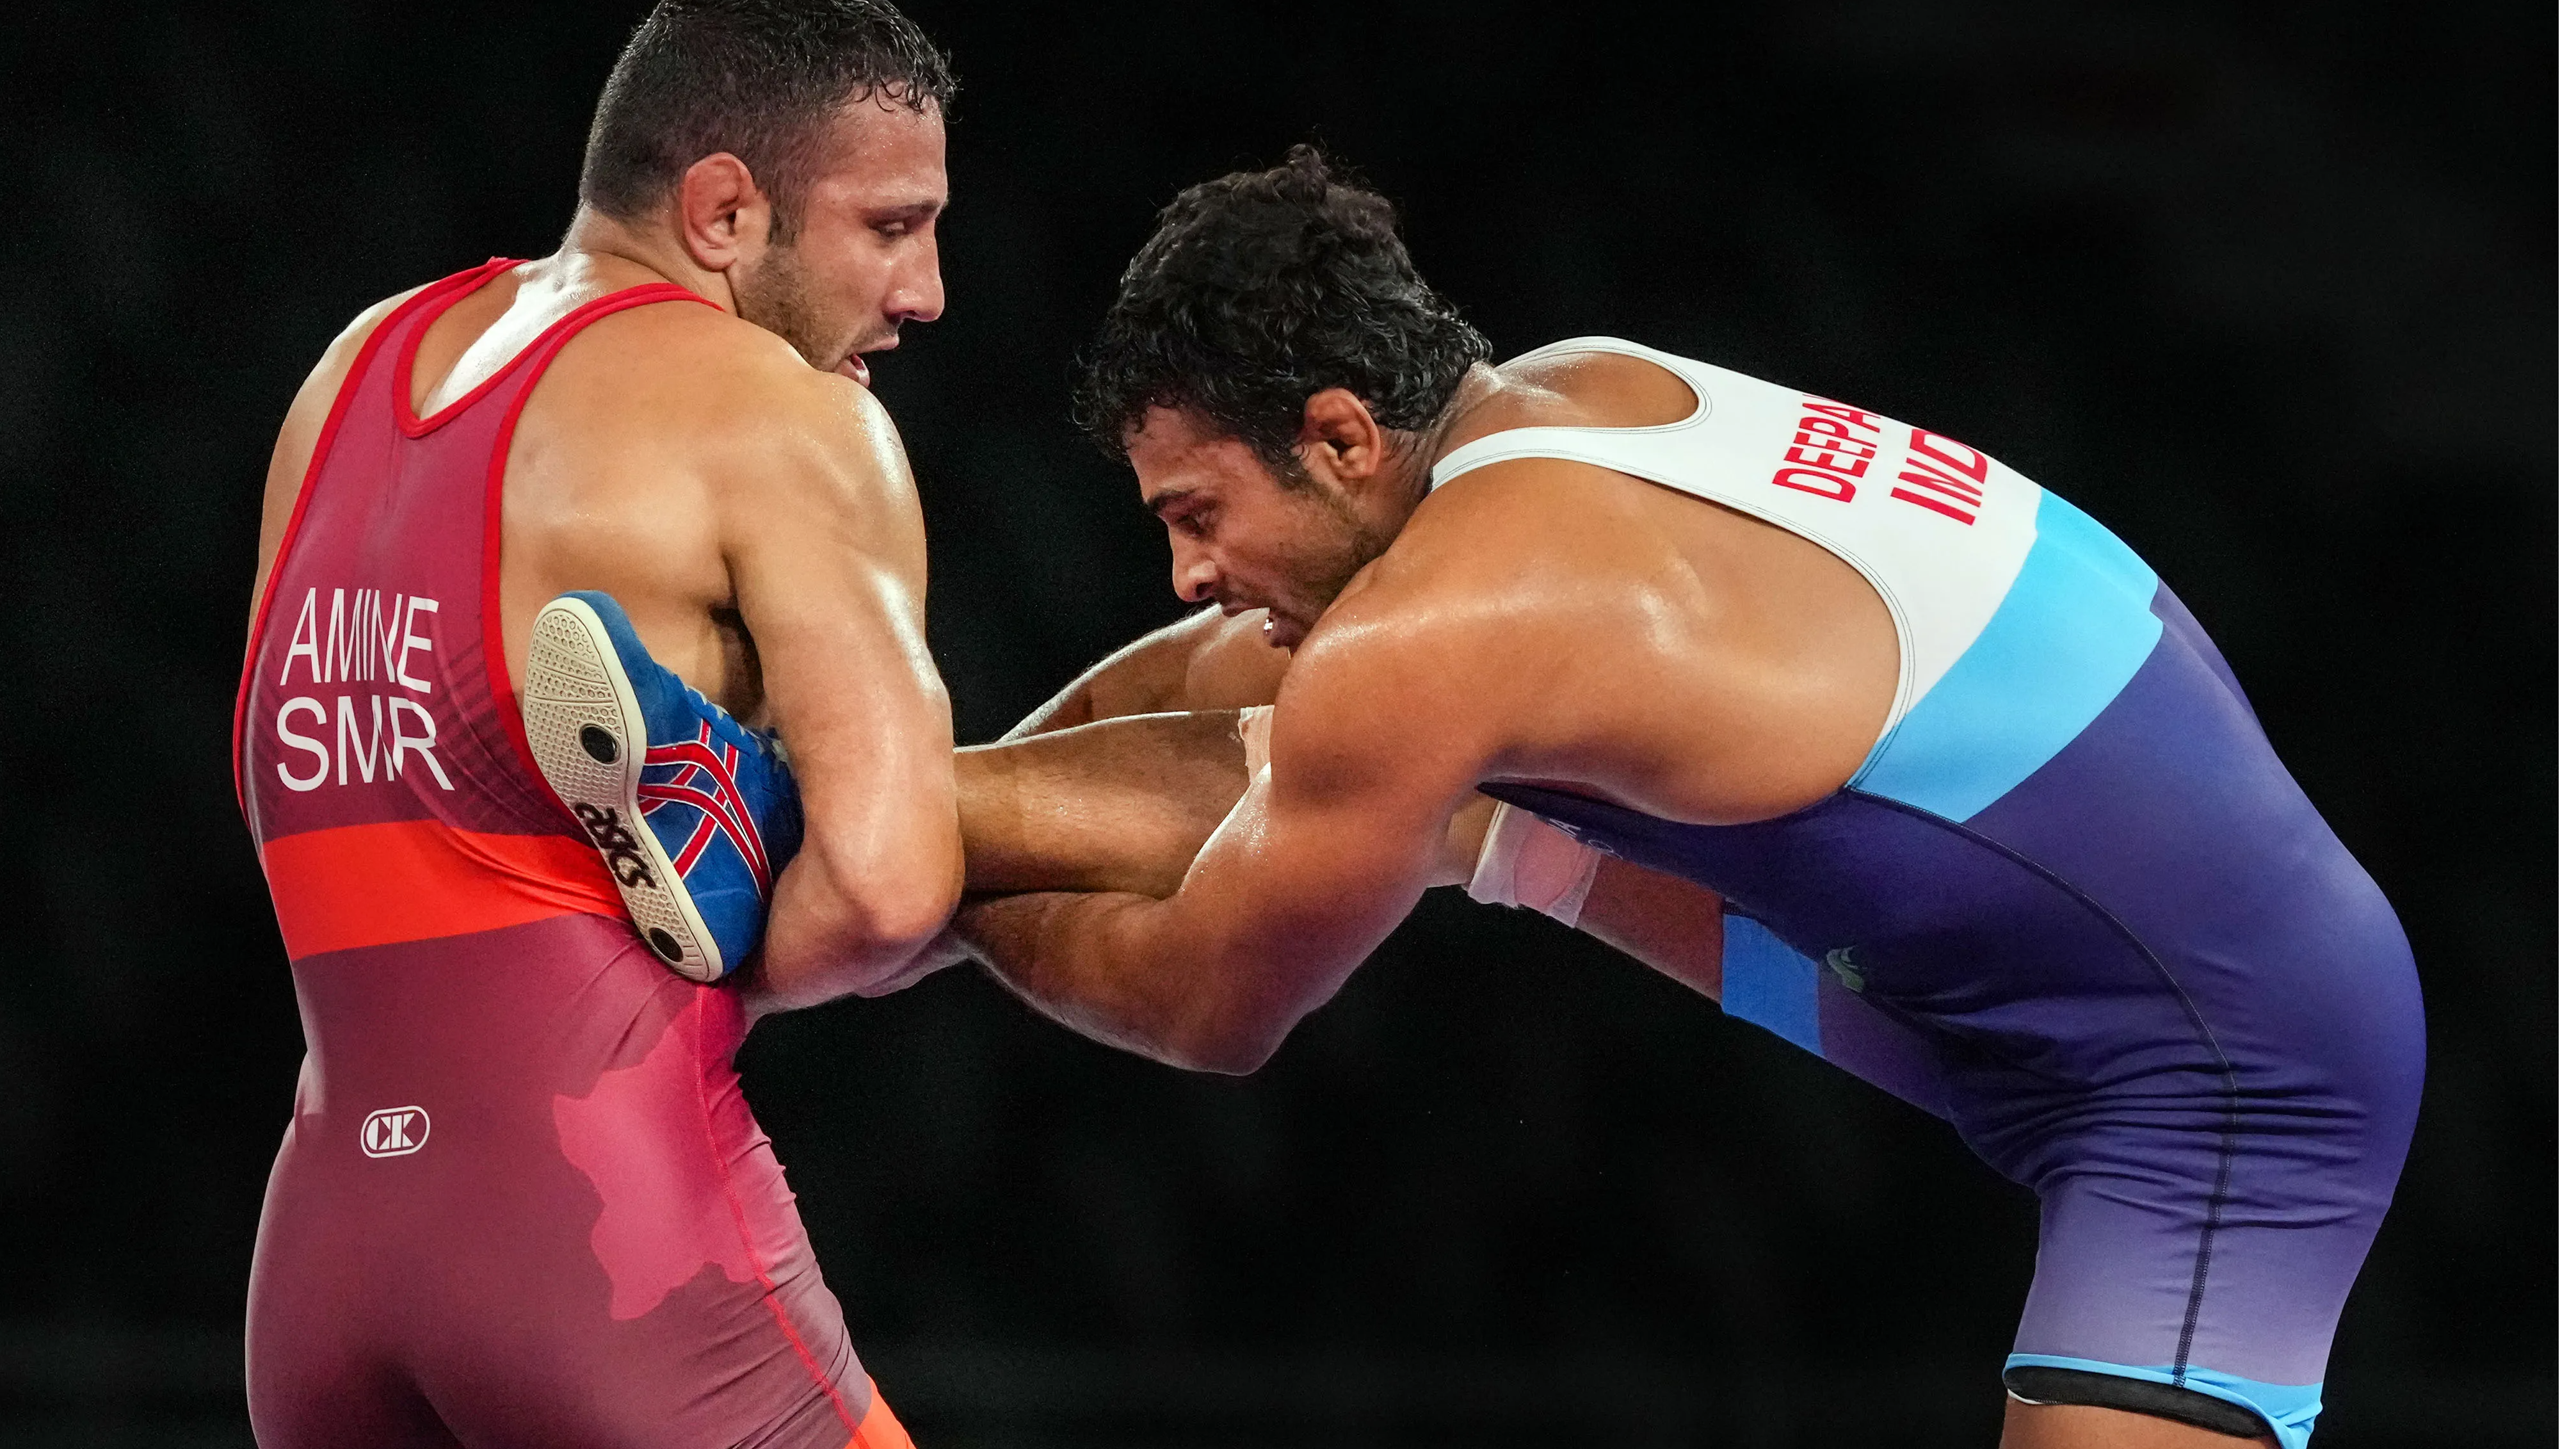 Indian wrestling team’s foreign assistant coach expelled from Tokyo Olympics